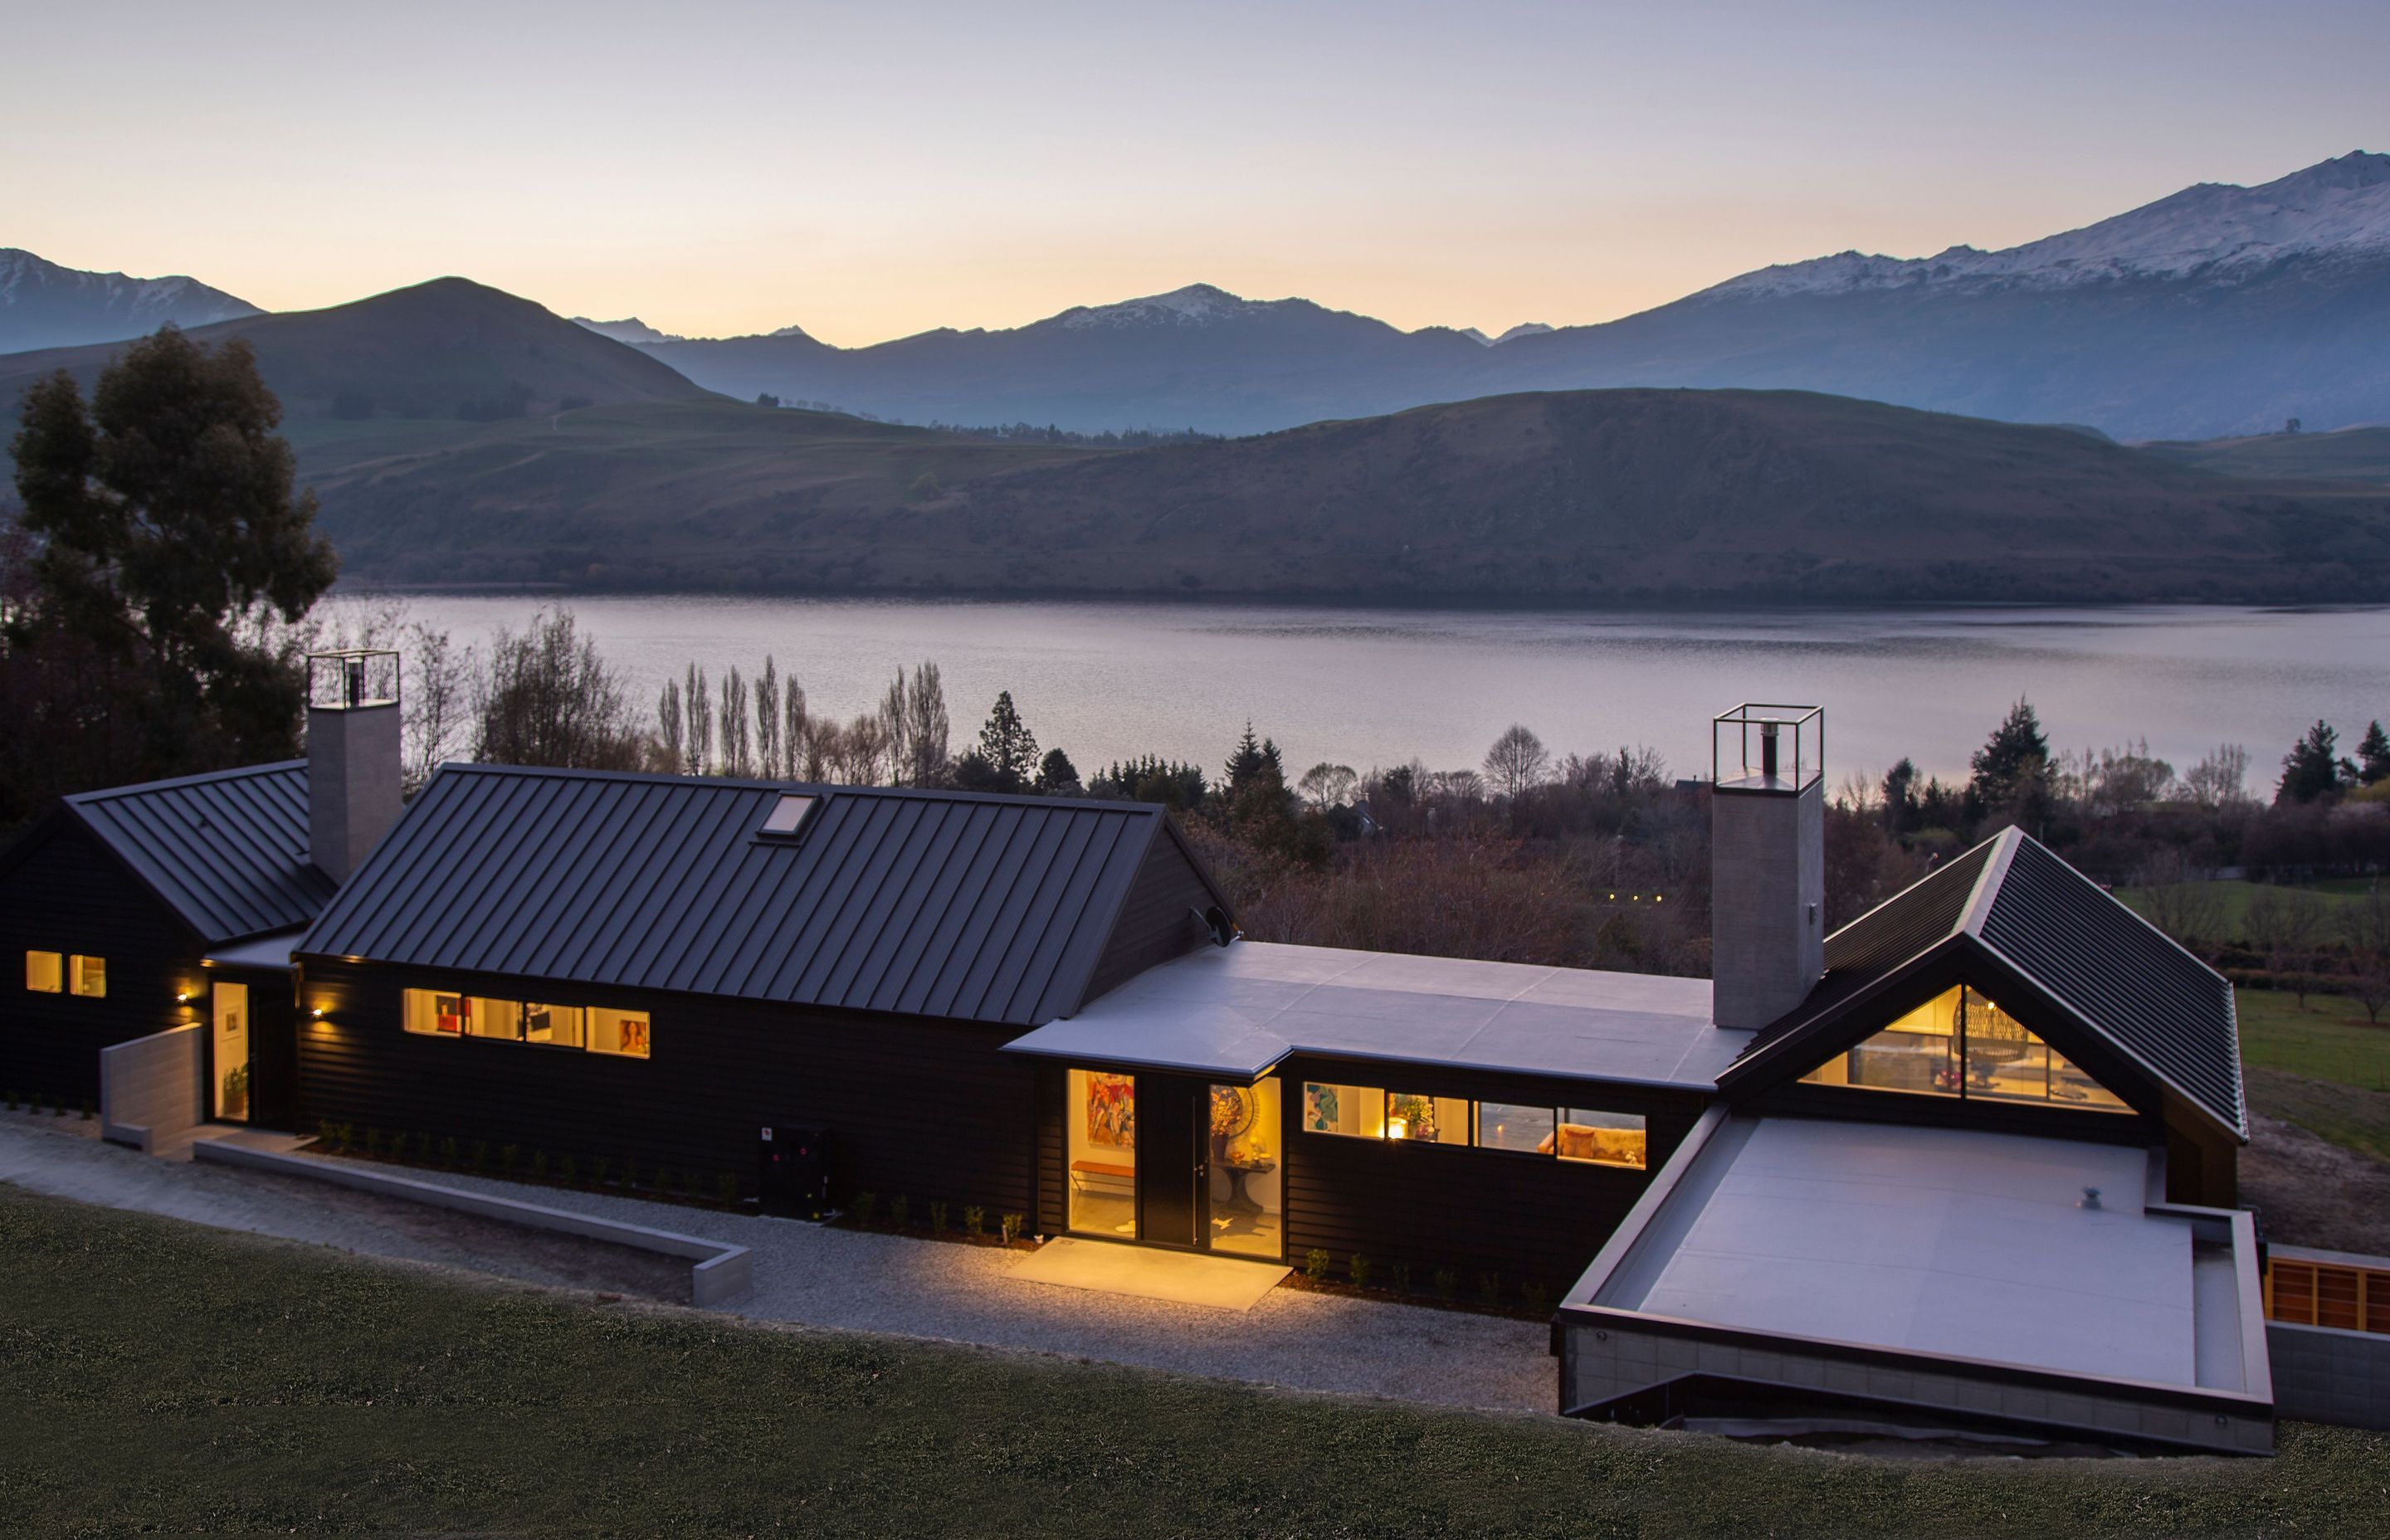 Steel tray roofing on the triangular forms providing a robust reflection of the mountainous terrain surrounding the home.